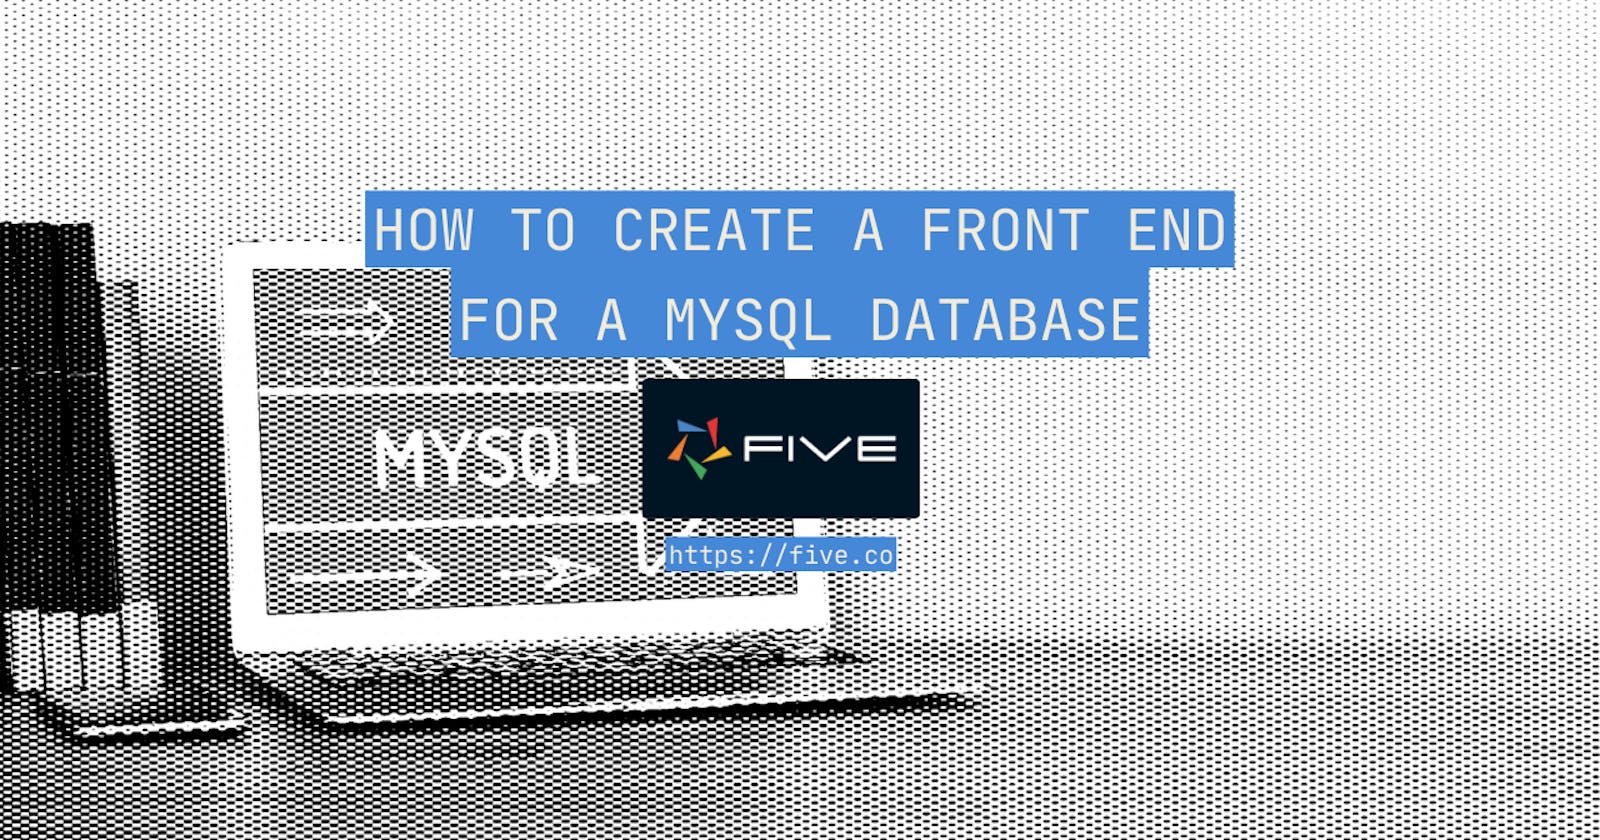 How To Create a Front End for a MySQL Database In 4 Steps